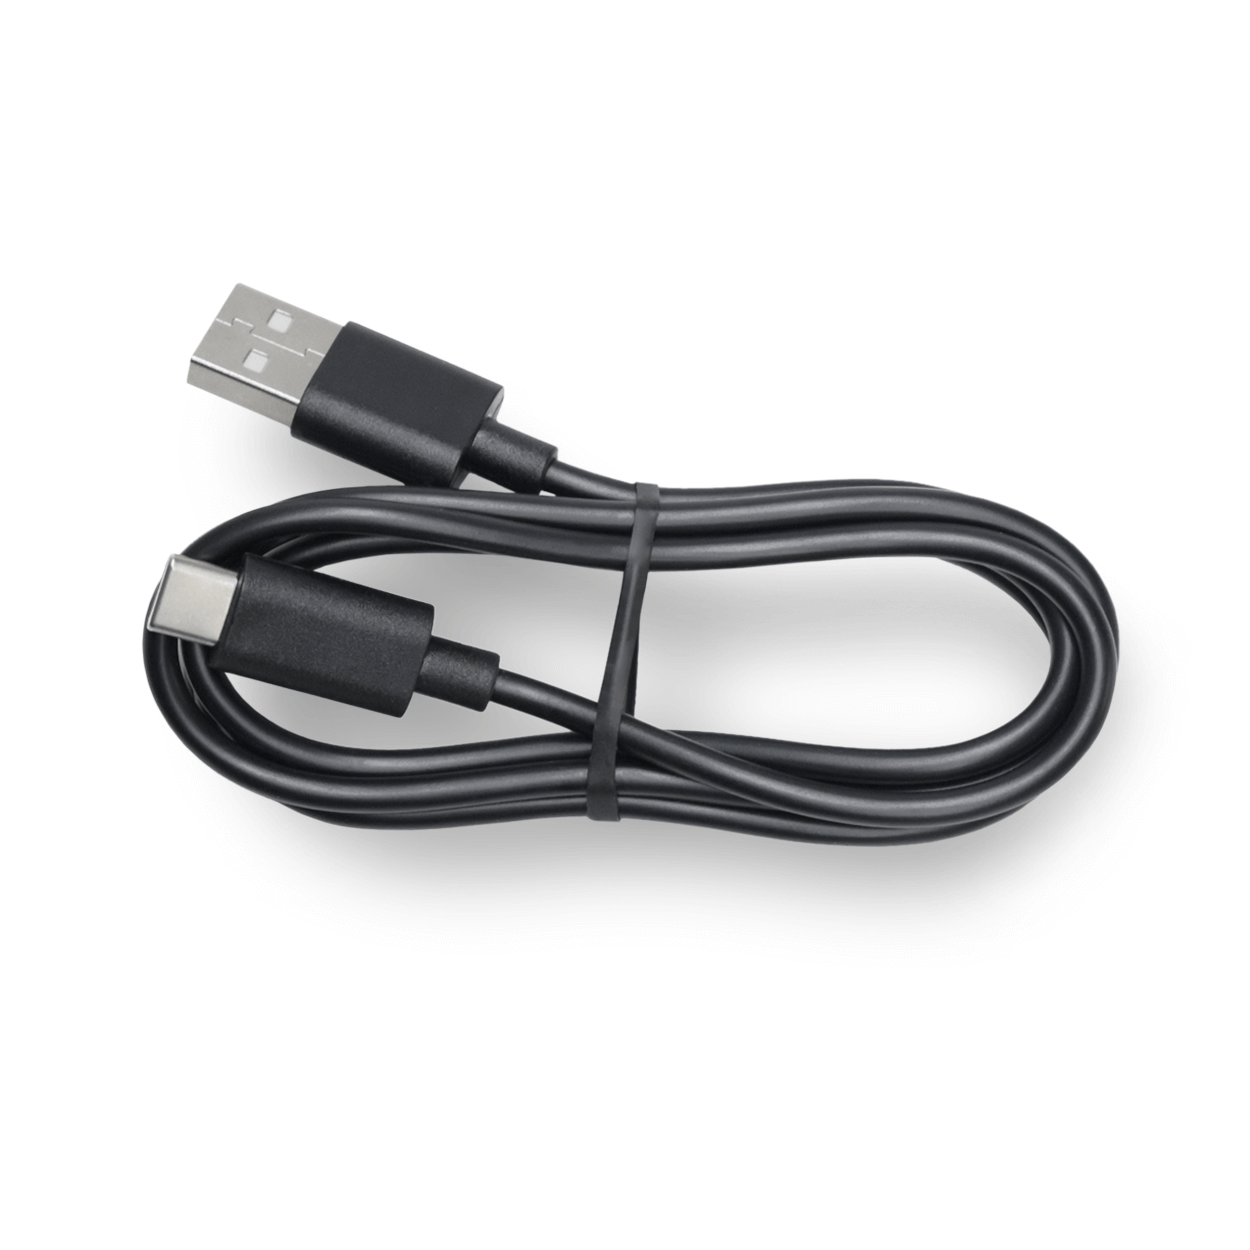 USB Cable (Type-A to Type-C)